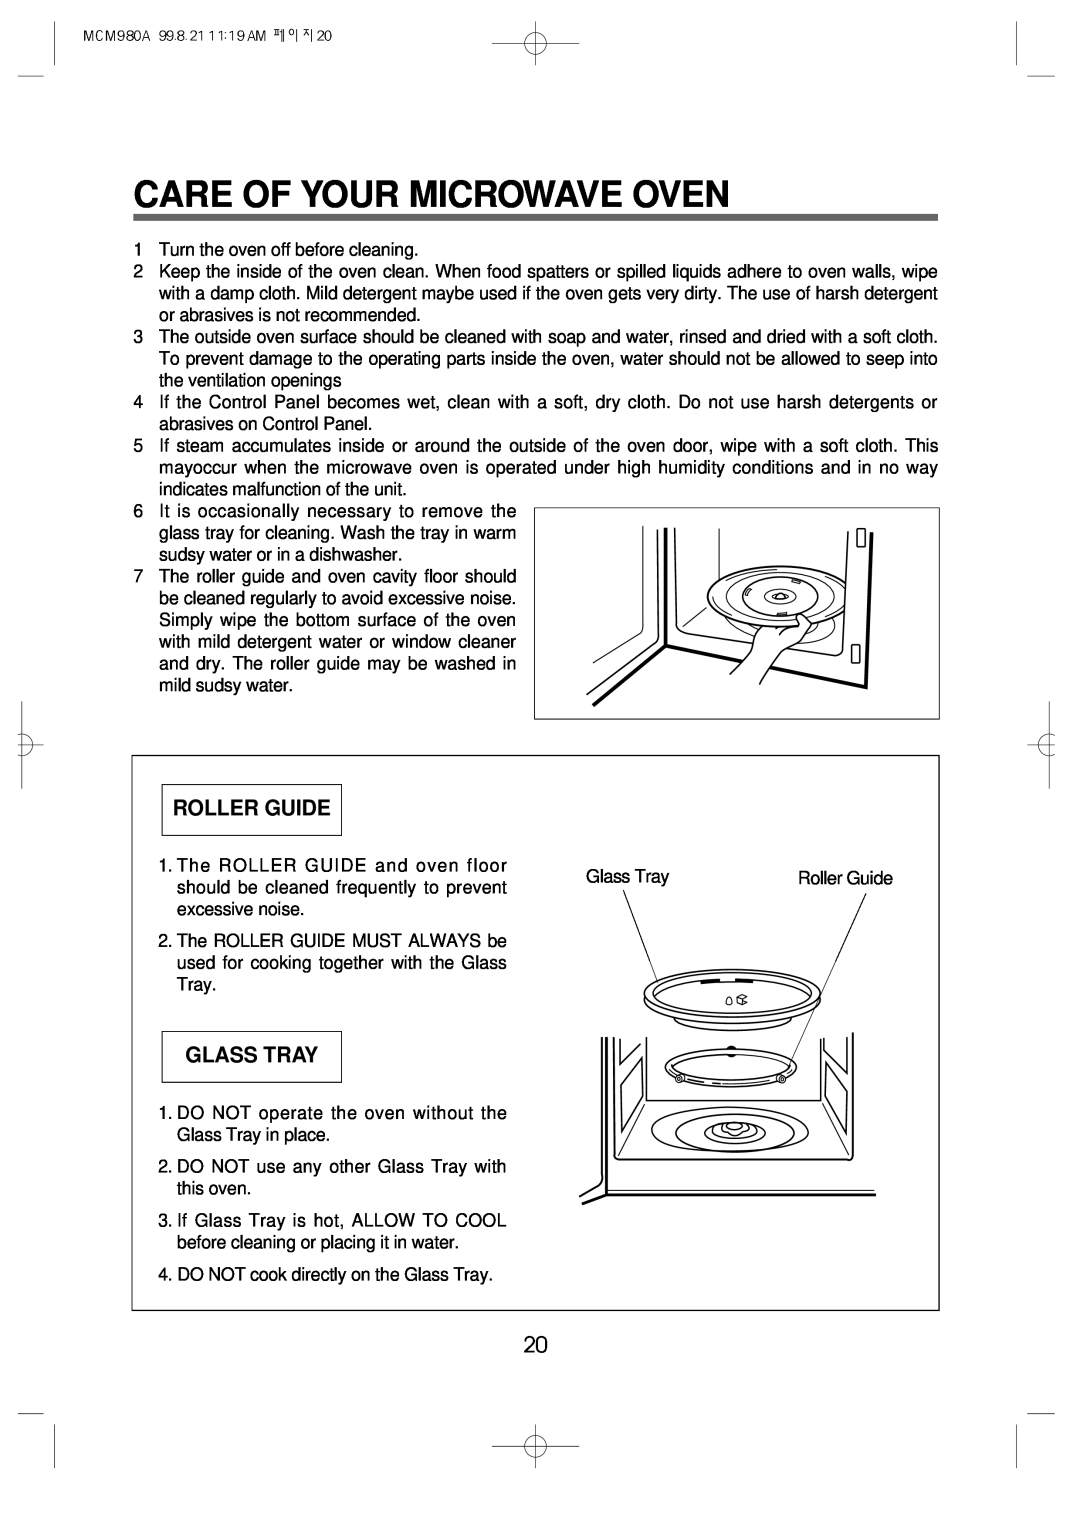 Daewoo MCM980A manual Care Of Your Microwave Oven, Roller Guide, Glass Tray 